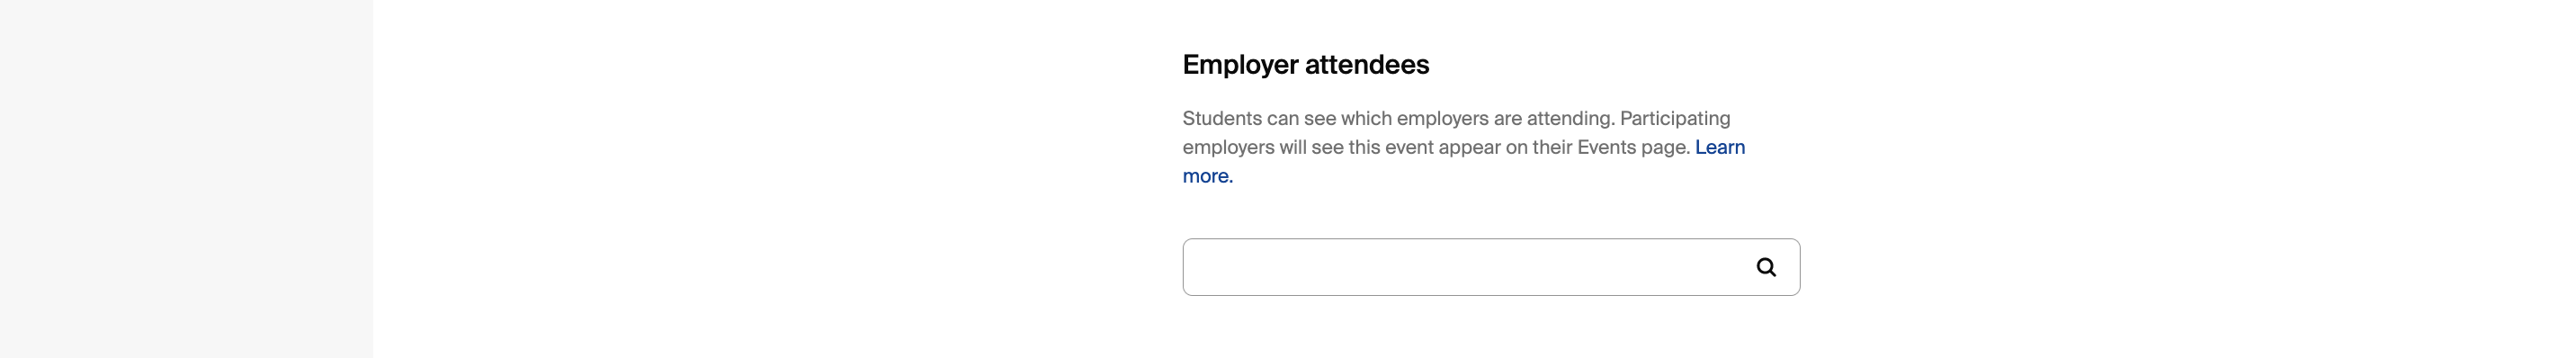 Employer_Attendees.png